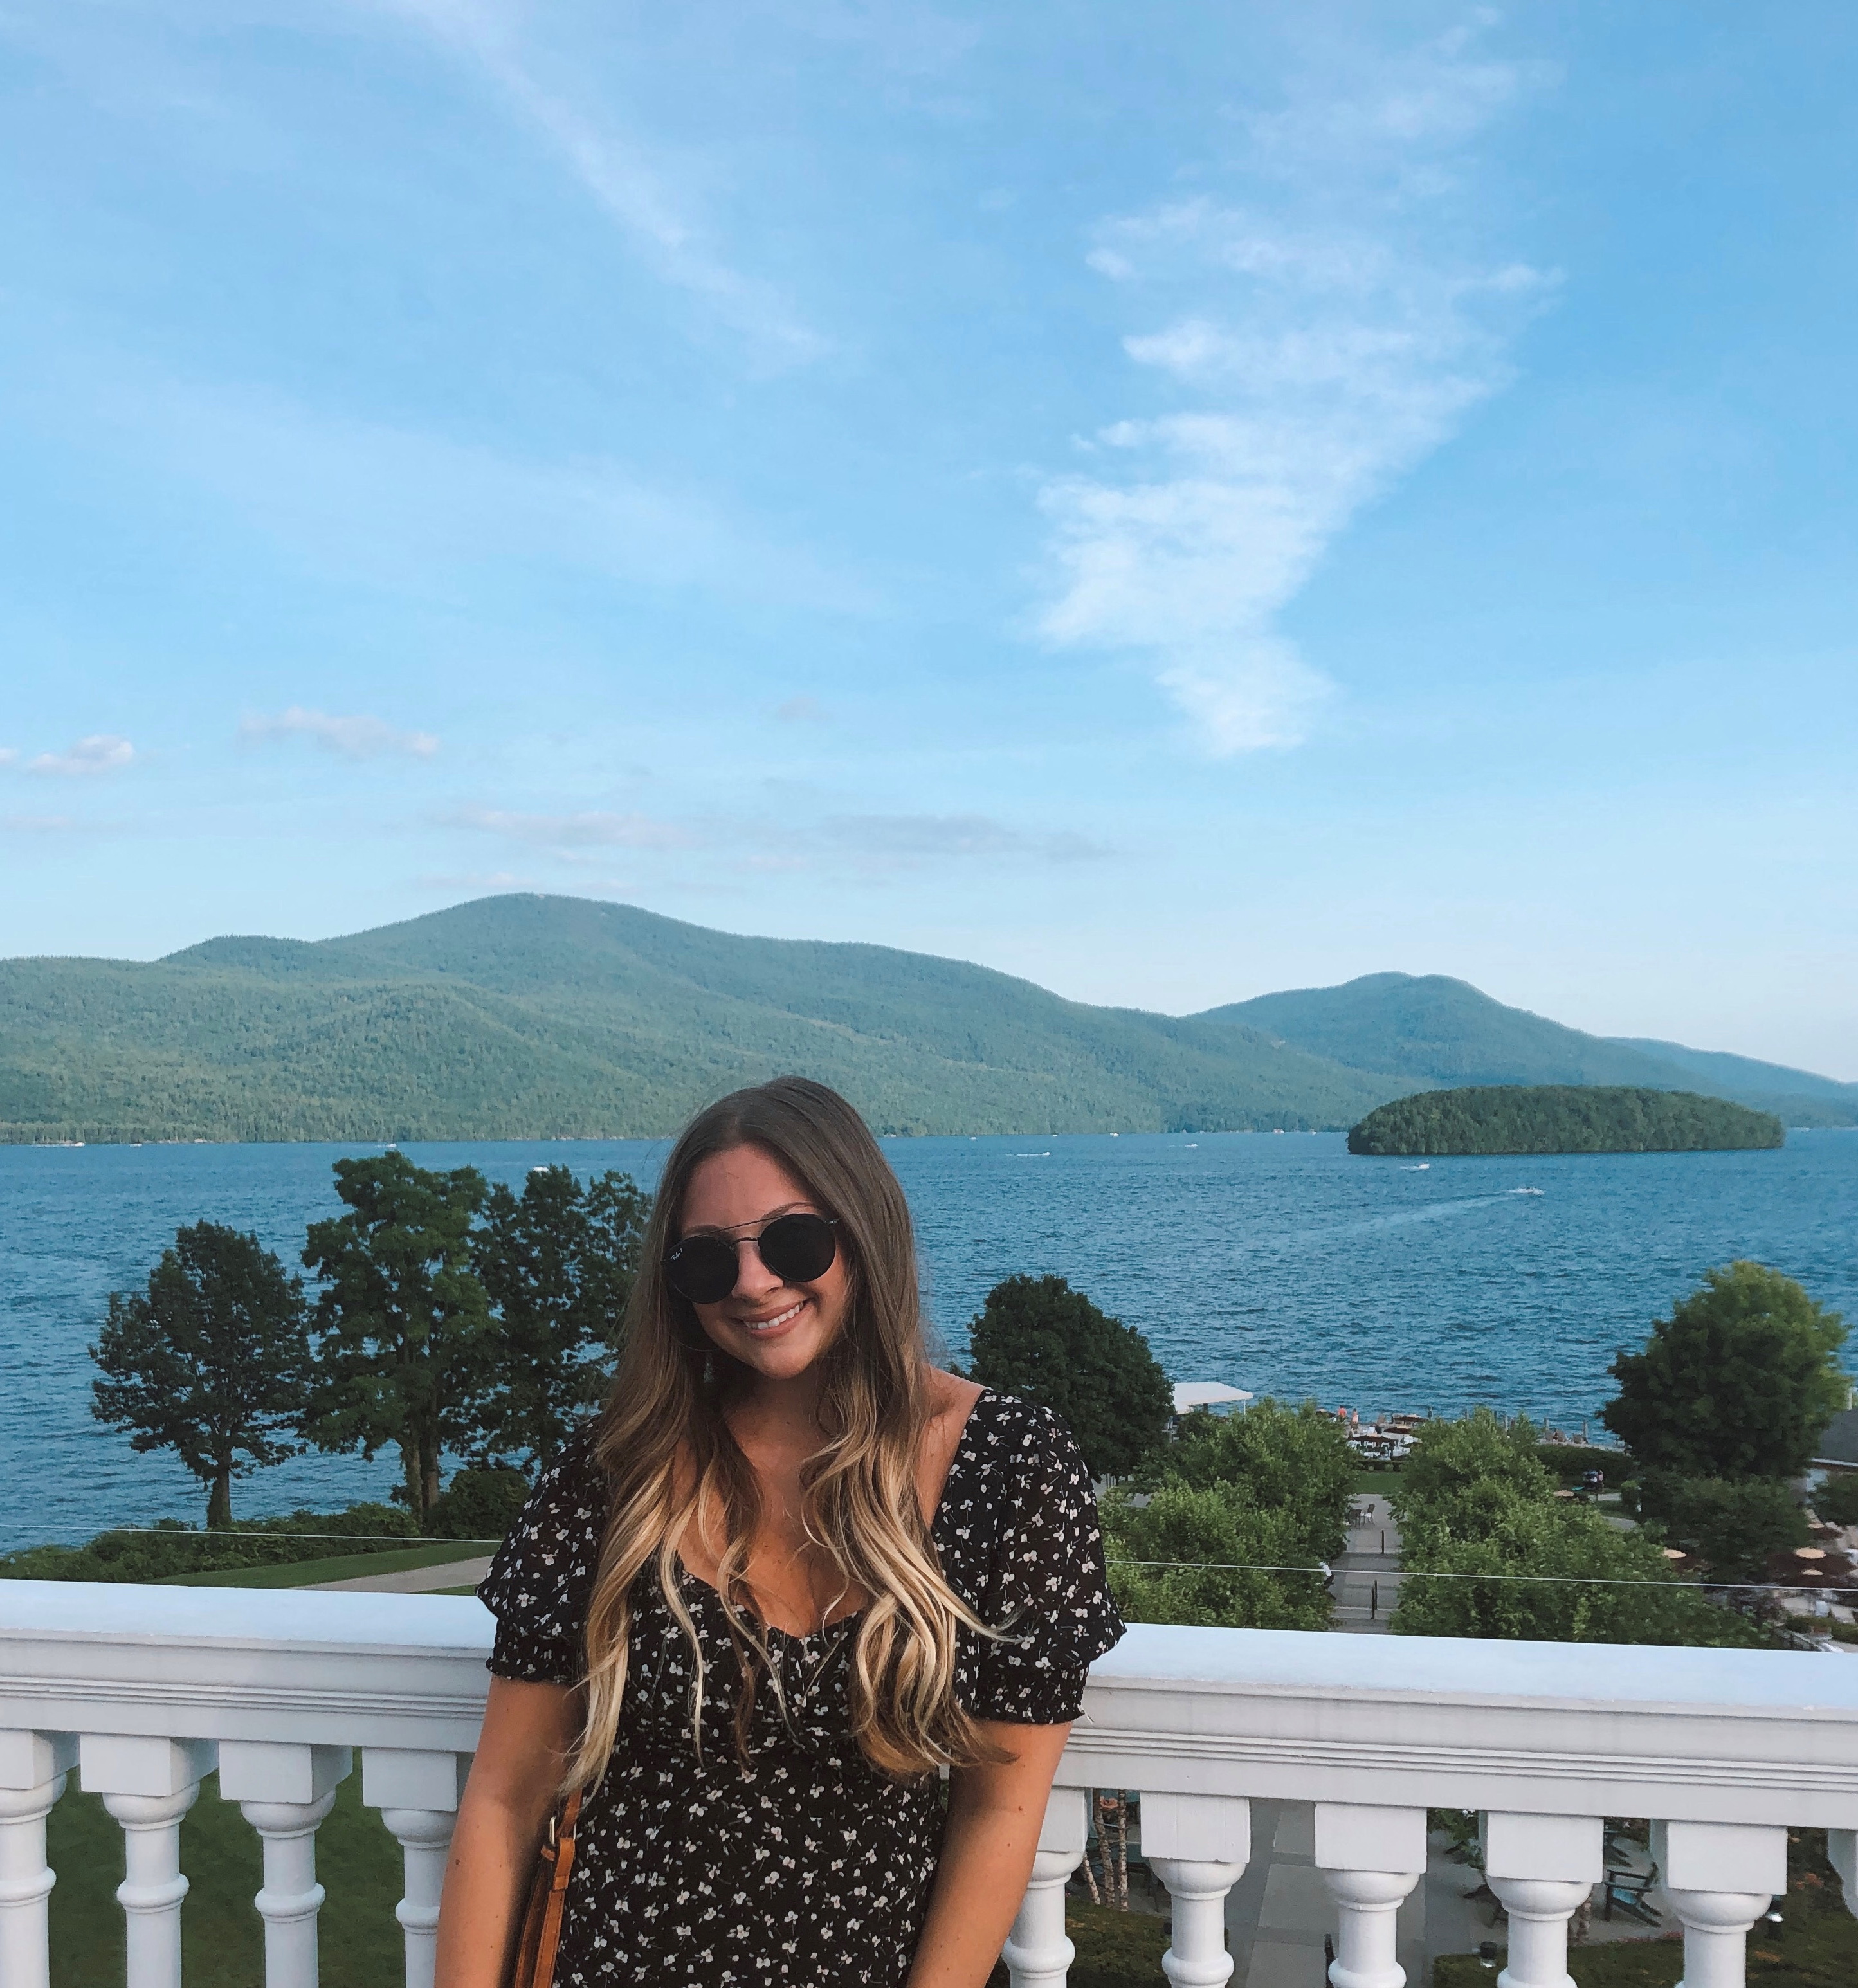 Gina Marino, 25, poses for a picture in Lake George, New York